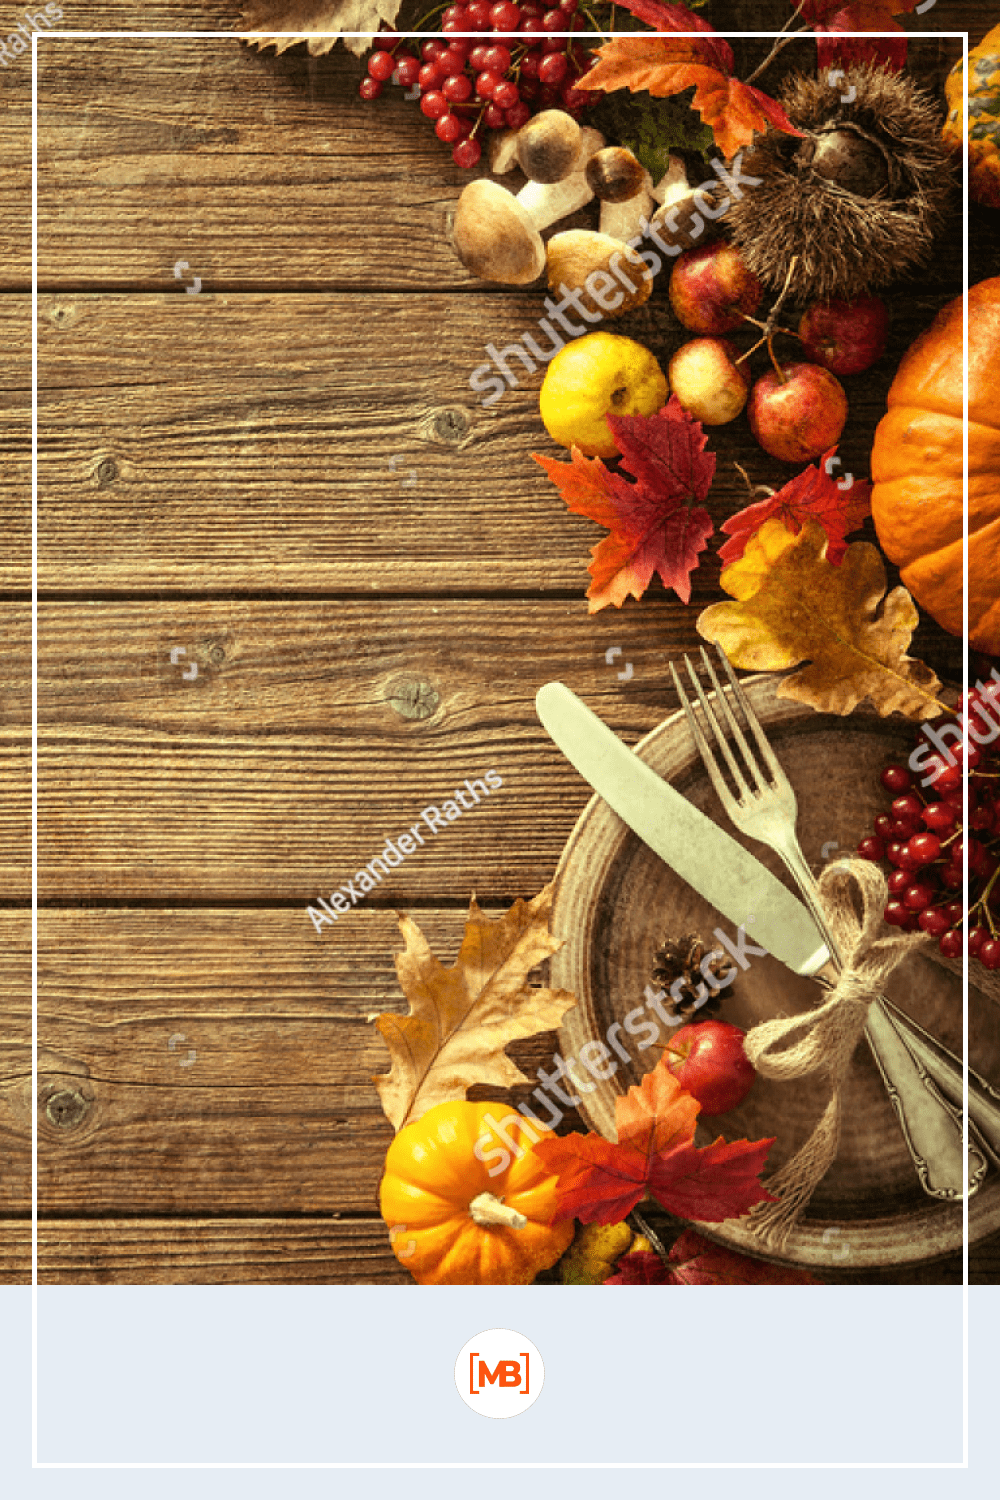 Autumn background from fallen leaves and fruits with vintage place setting on old wooden table.